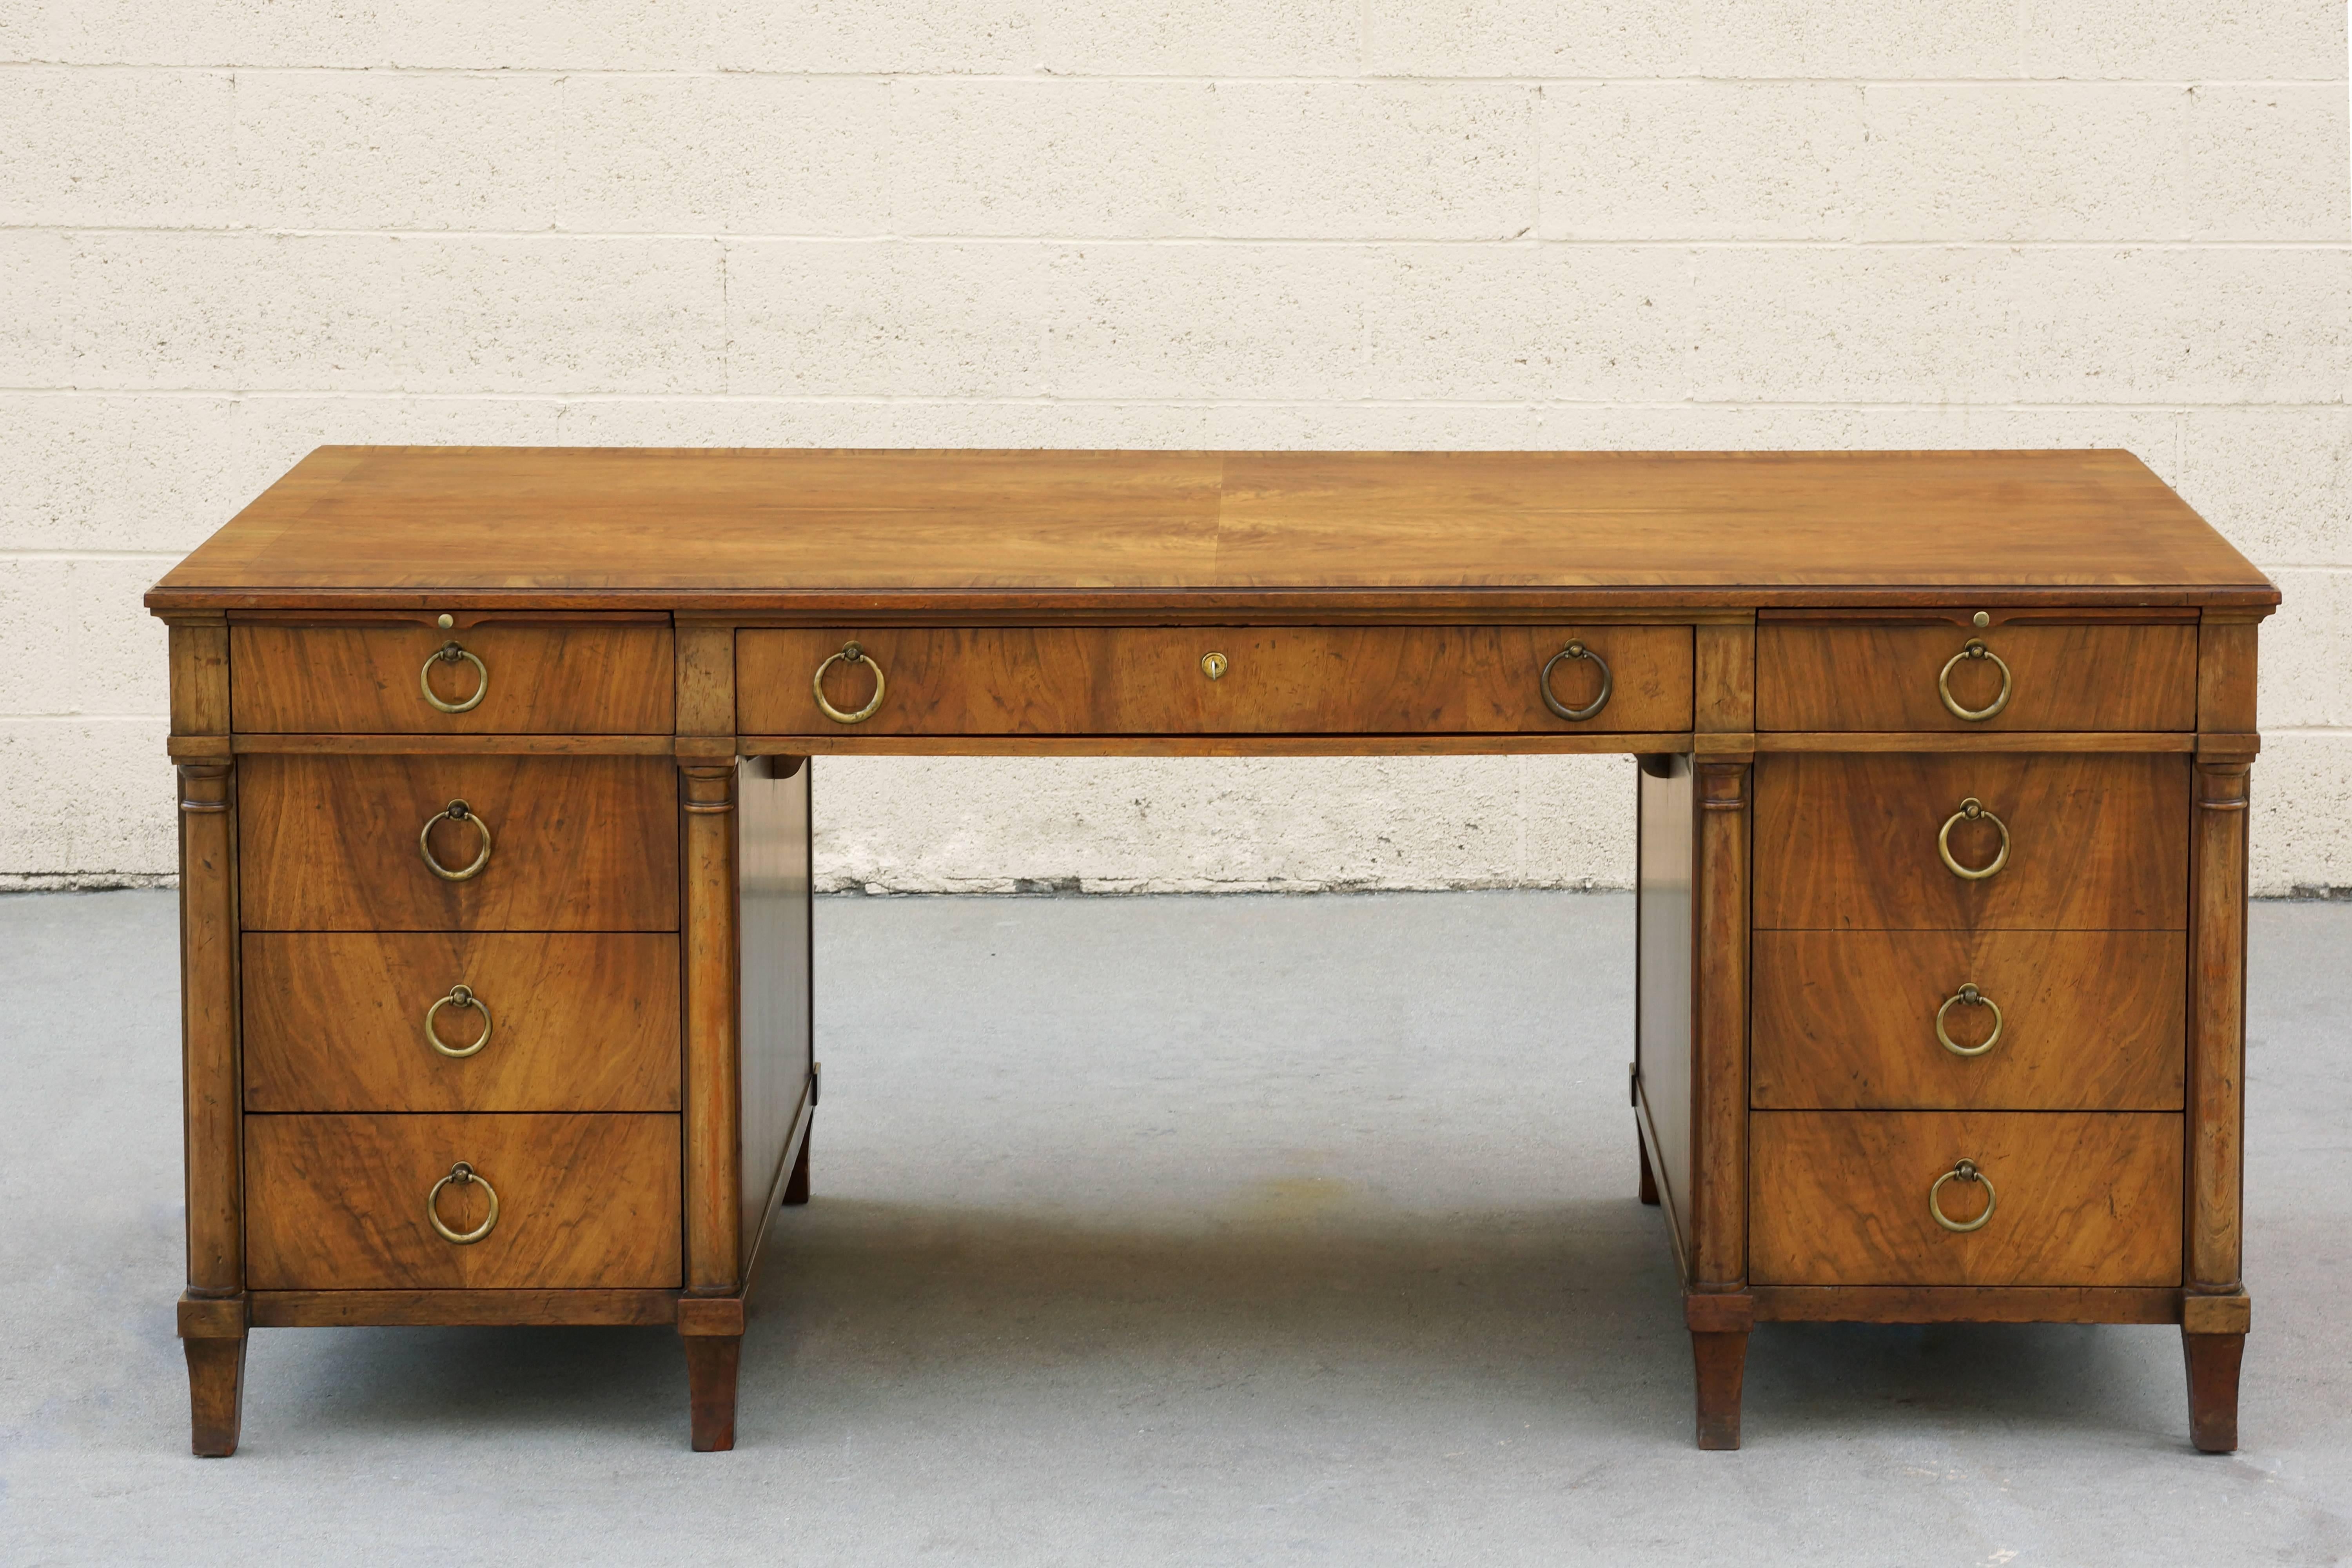 Classic American Empire executive desk by Baker. This impressive solid walnut desk features six legs, brass pull rings, pull out paper trays and locking utility drawer with key. Most uniquely, the front of the desk includes a large pull out wood